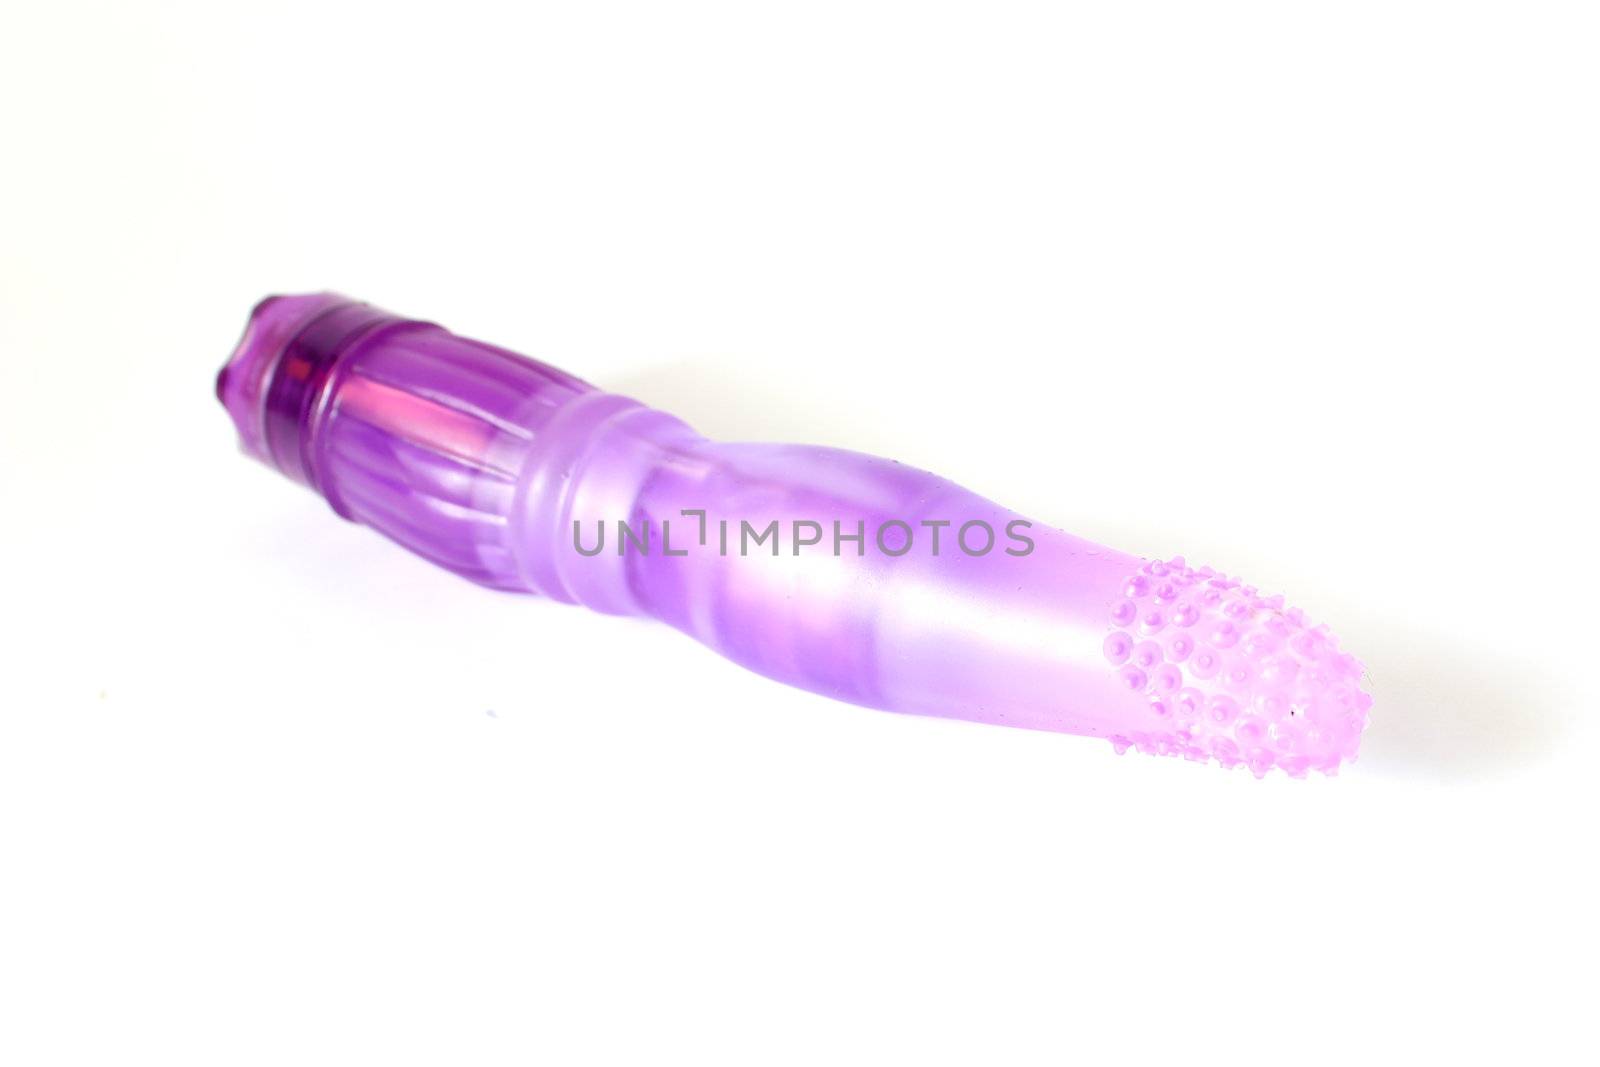 Isolated purple dildo used for adult entertainment.